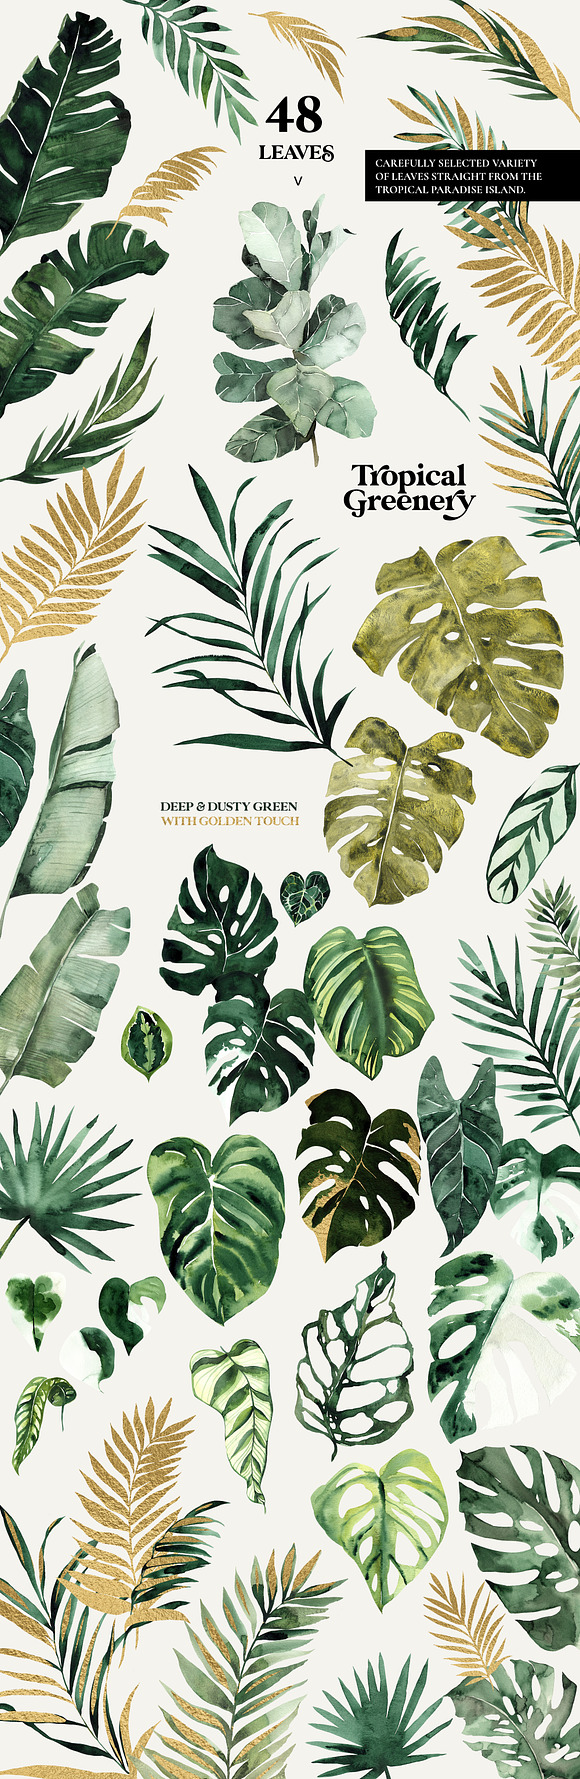 TROPICAL GREENERY green & gold leaf in Illustrations - product preview 3